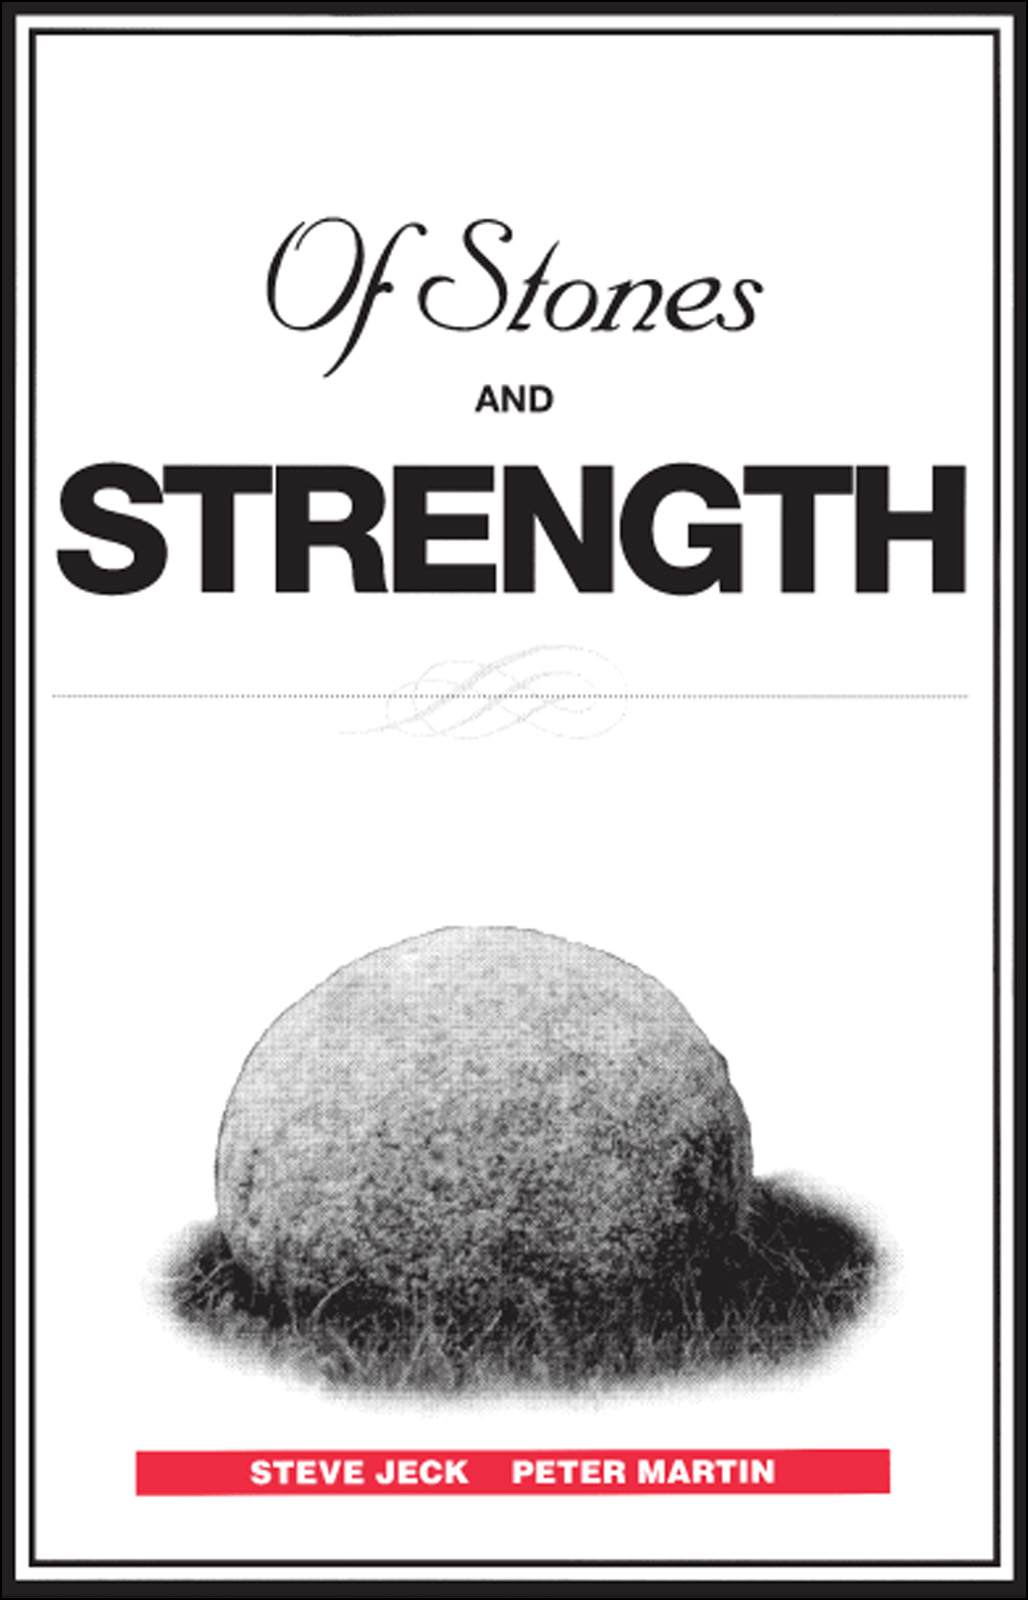 Of Stones and Strength bookcover